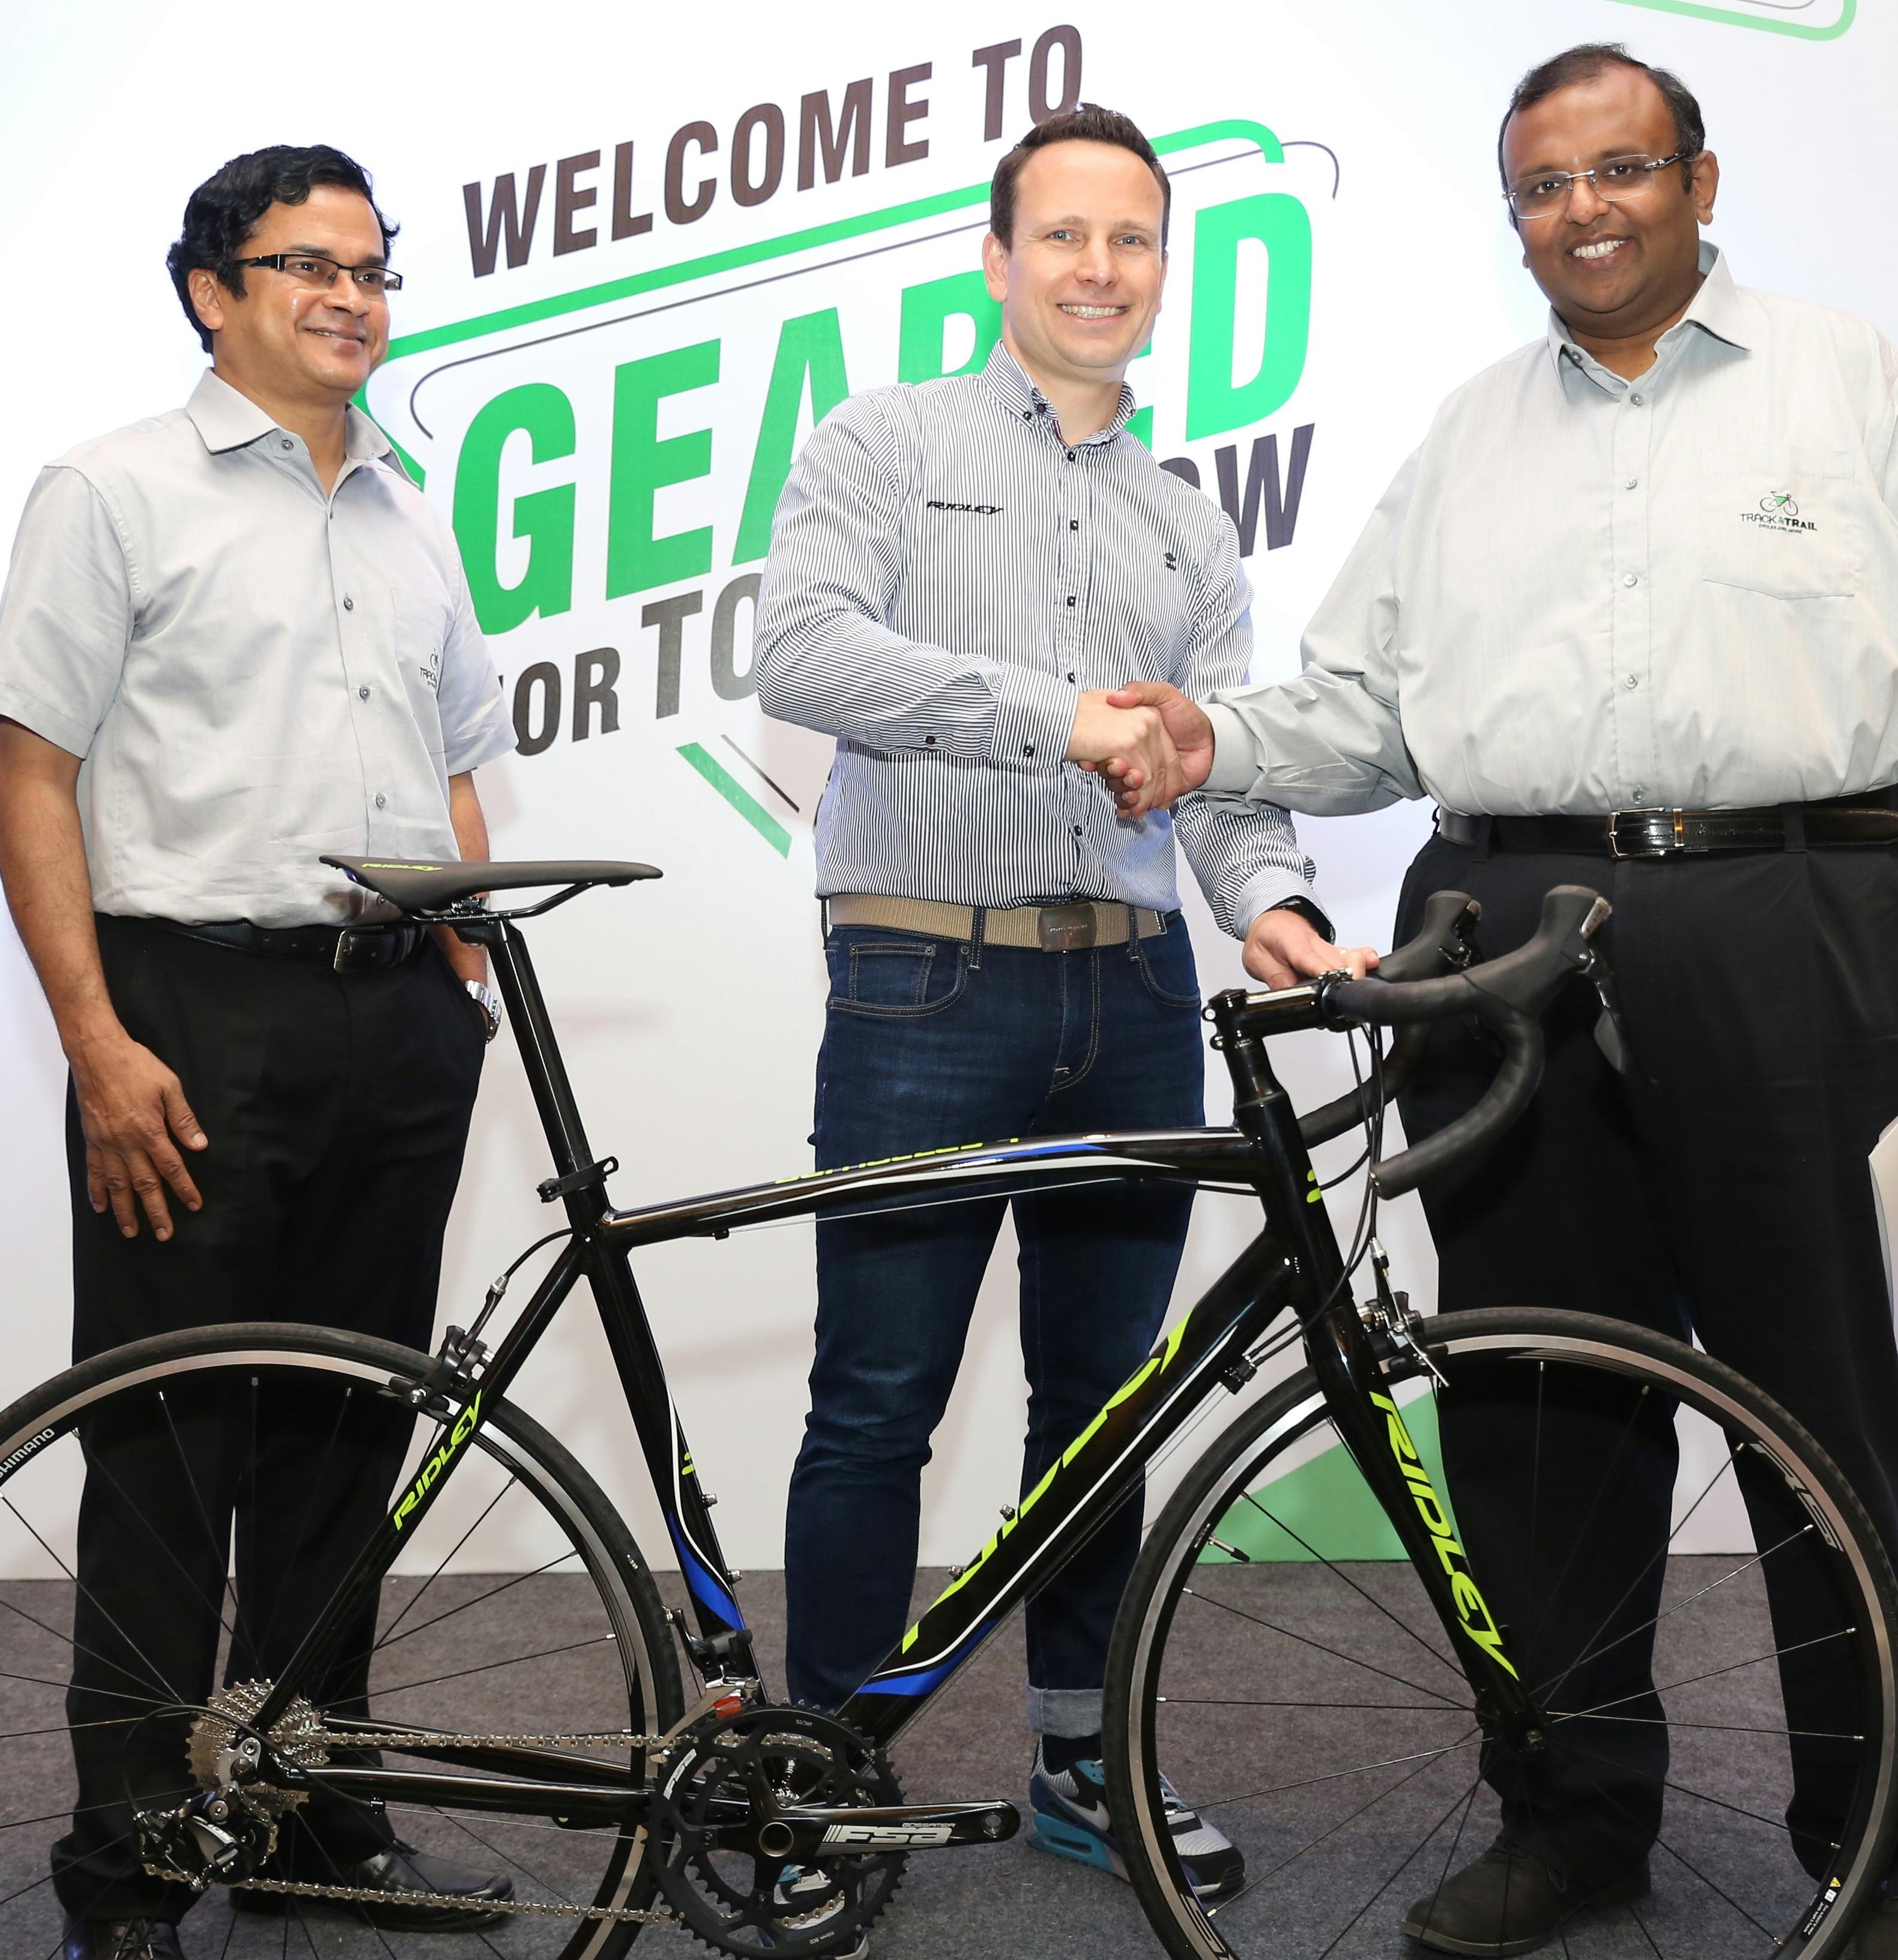 Edward Vlutters, International Sales Director of Ridely Sport with Arun Alagappan, President of TI Cycles (r.) and K R Chandrasekaren, COO of TI Cycles (l.). – Photo Satnam Singh